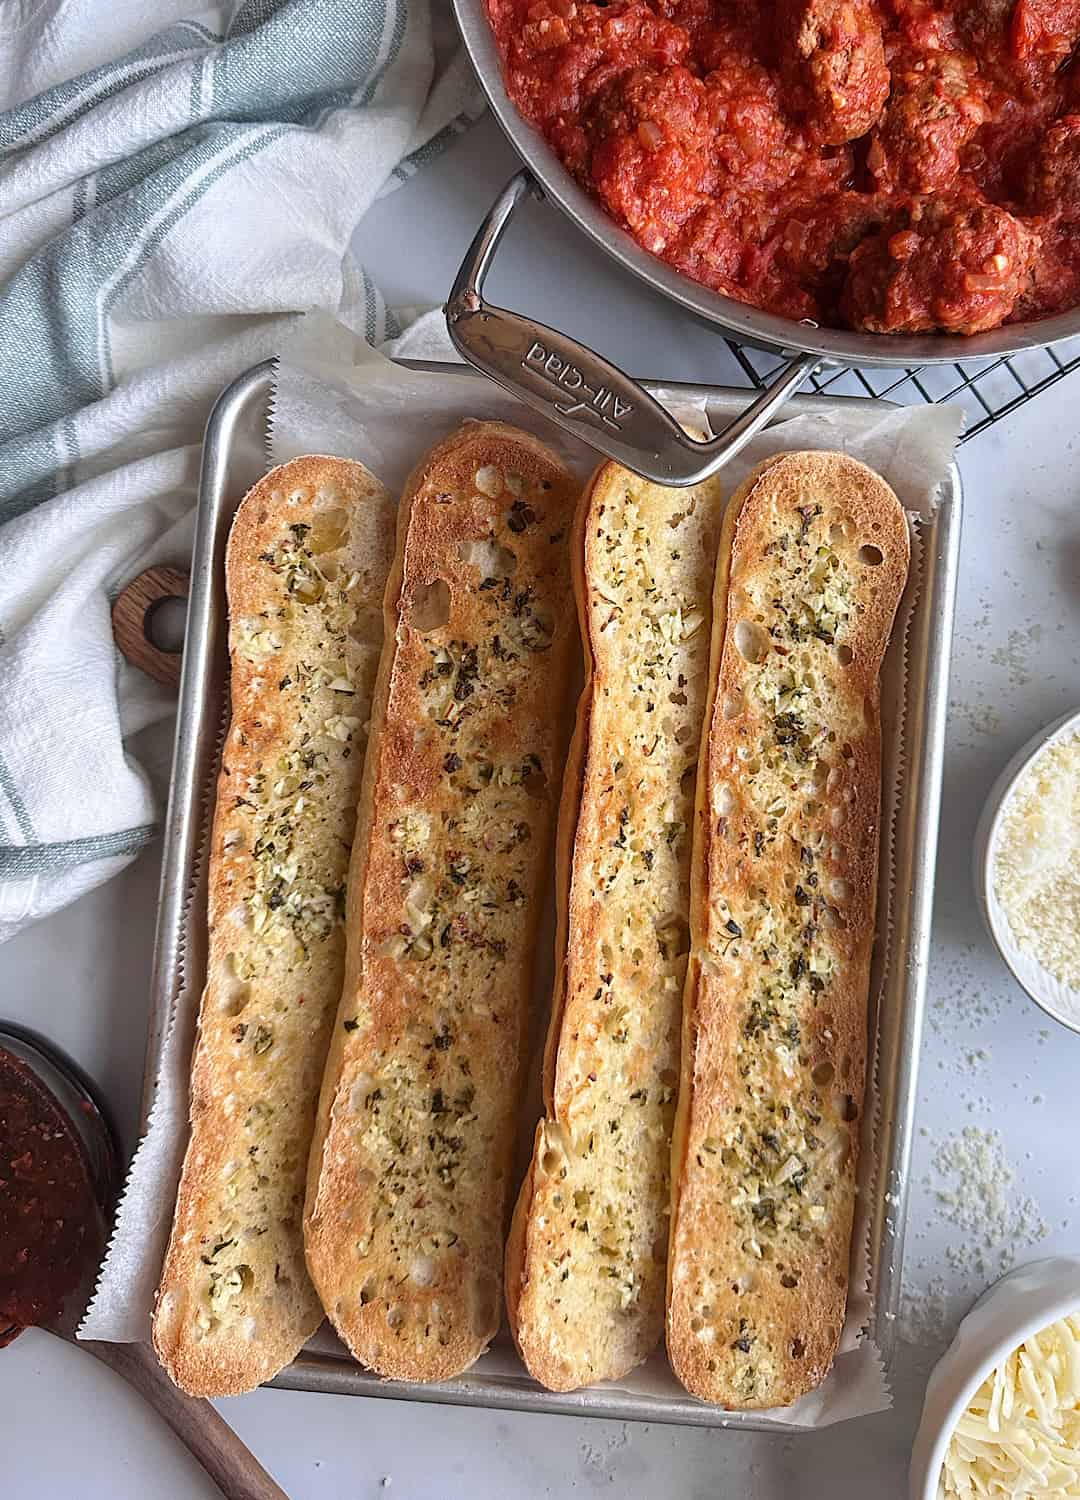 crisped garlic bread with meatballs on the side